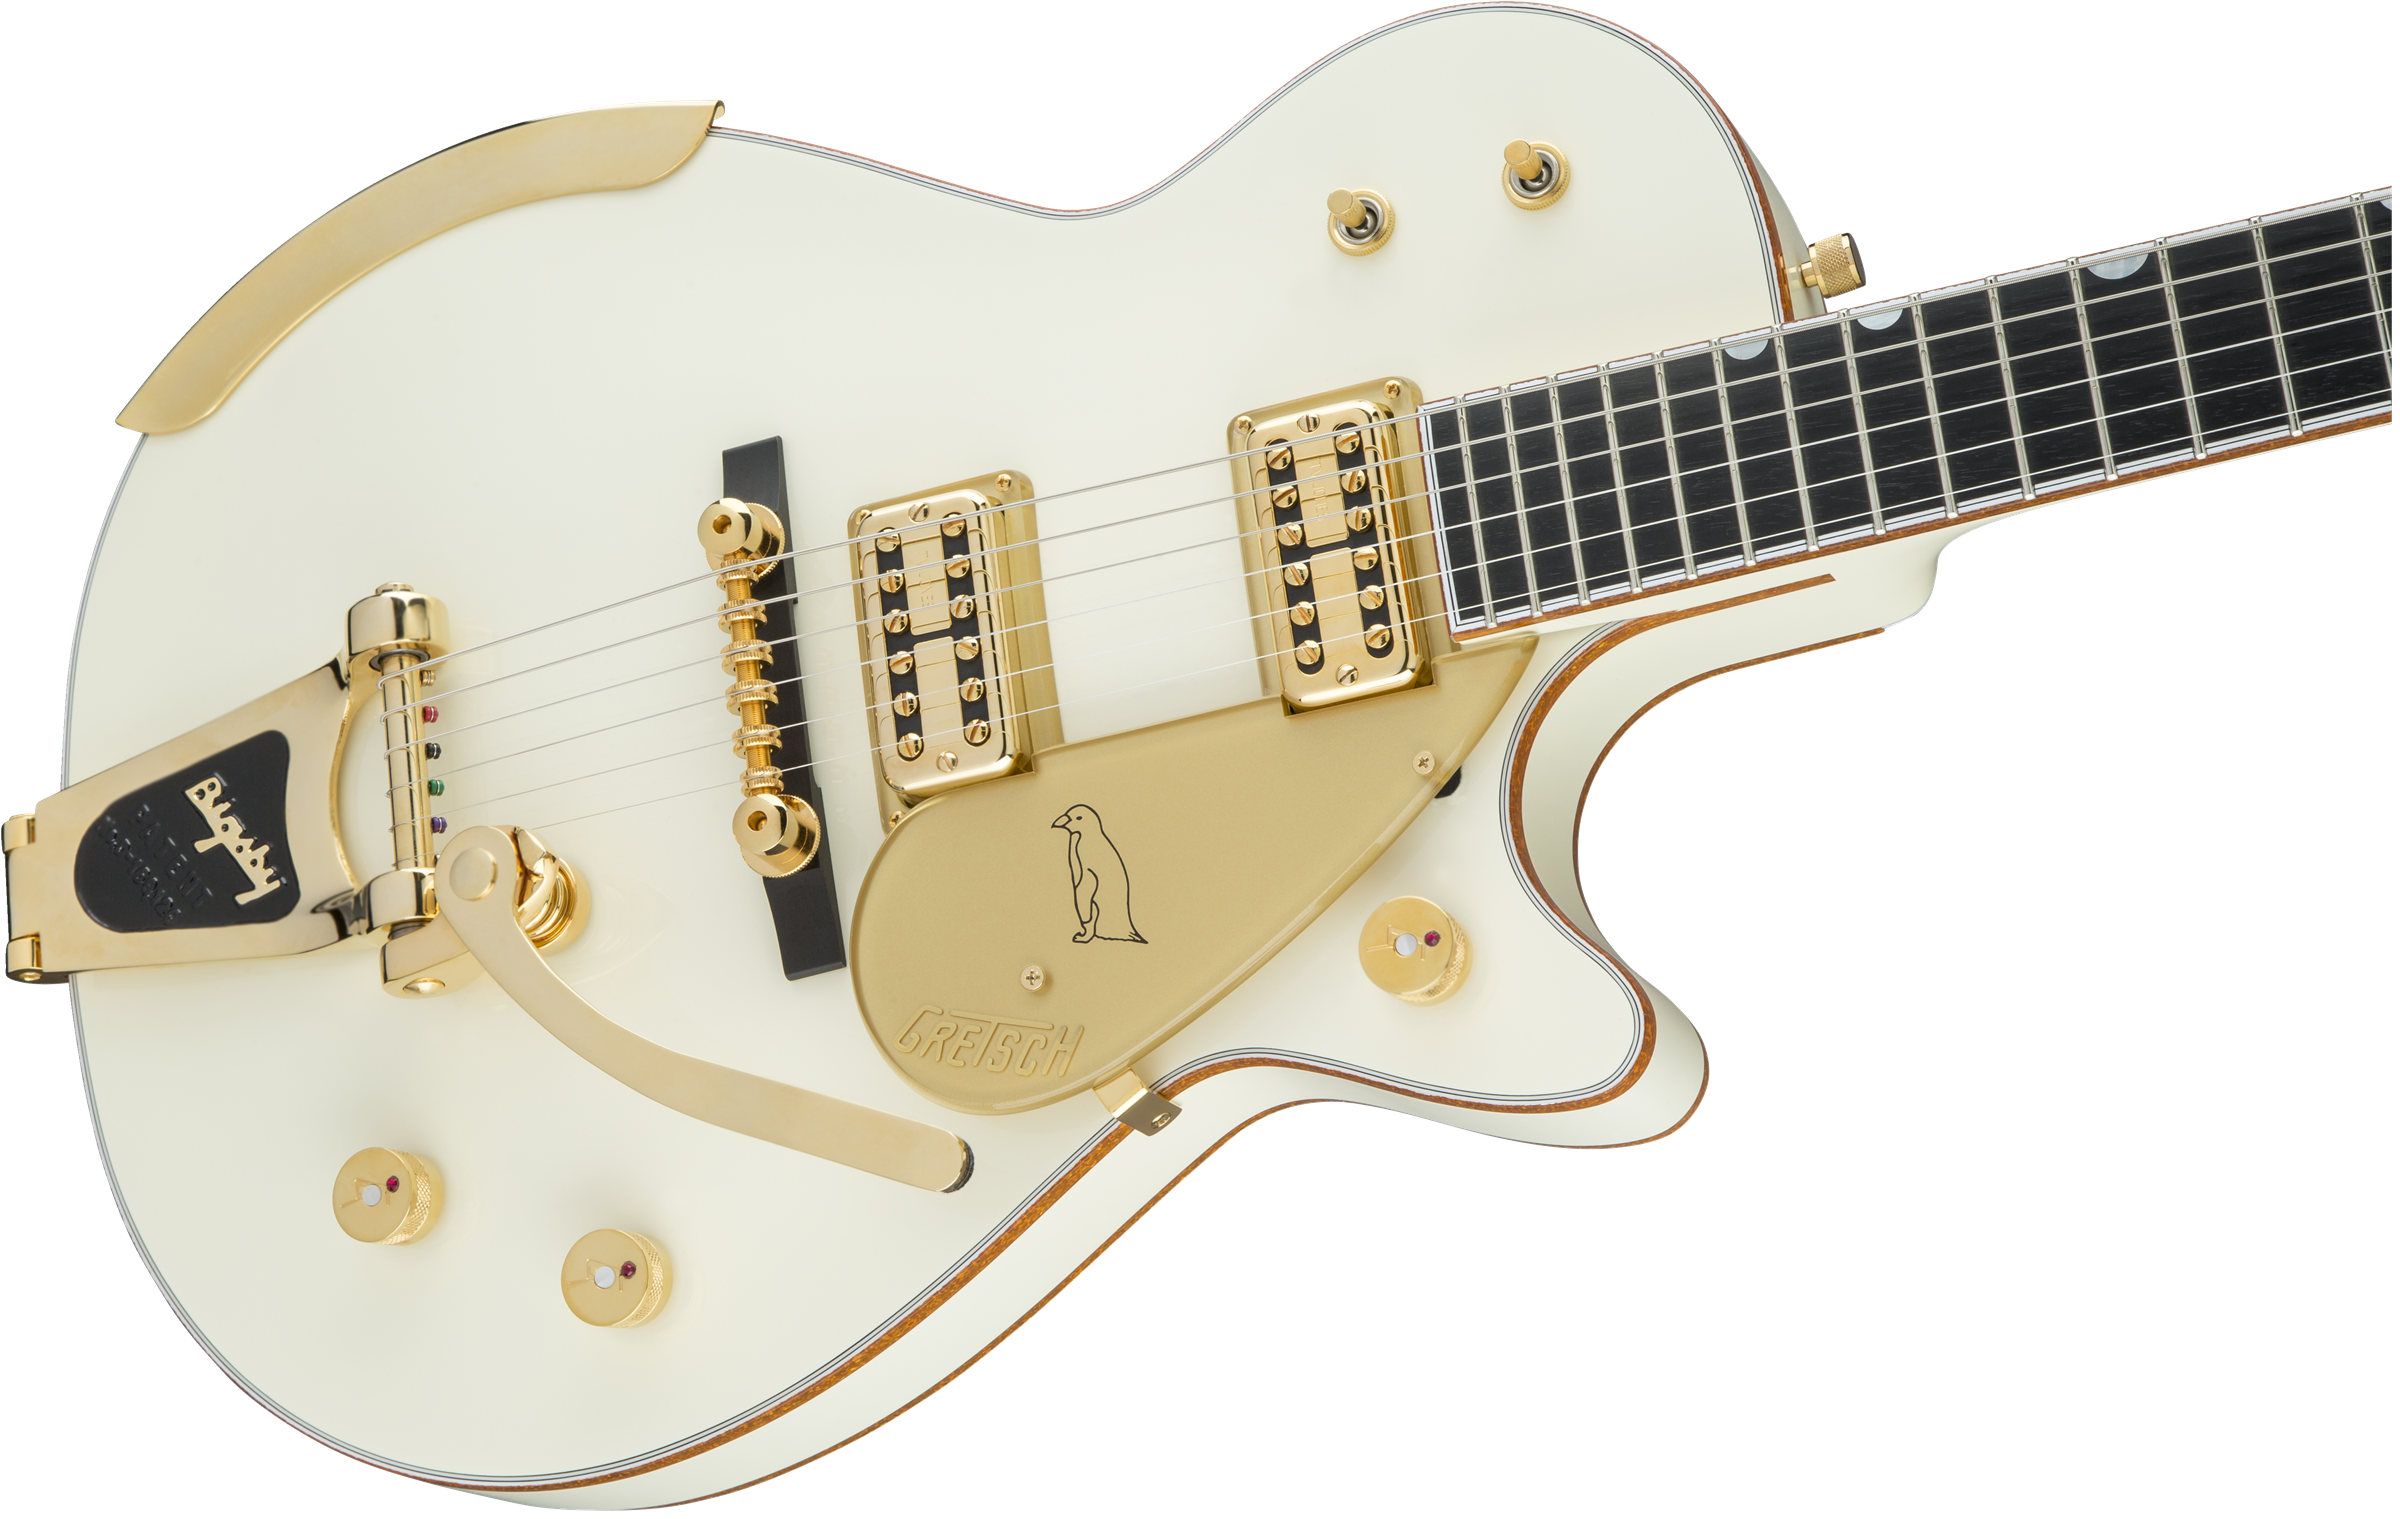 Gretsch G6134T-58 Vintage Select '58 Penguin with Bigsby, TV Jones - Vintage White